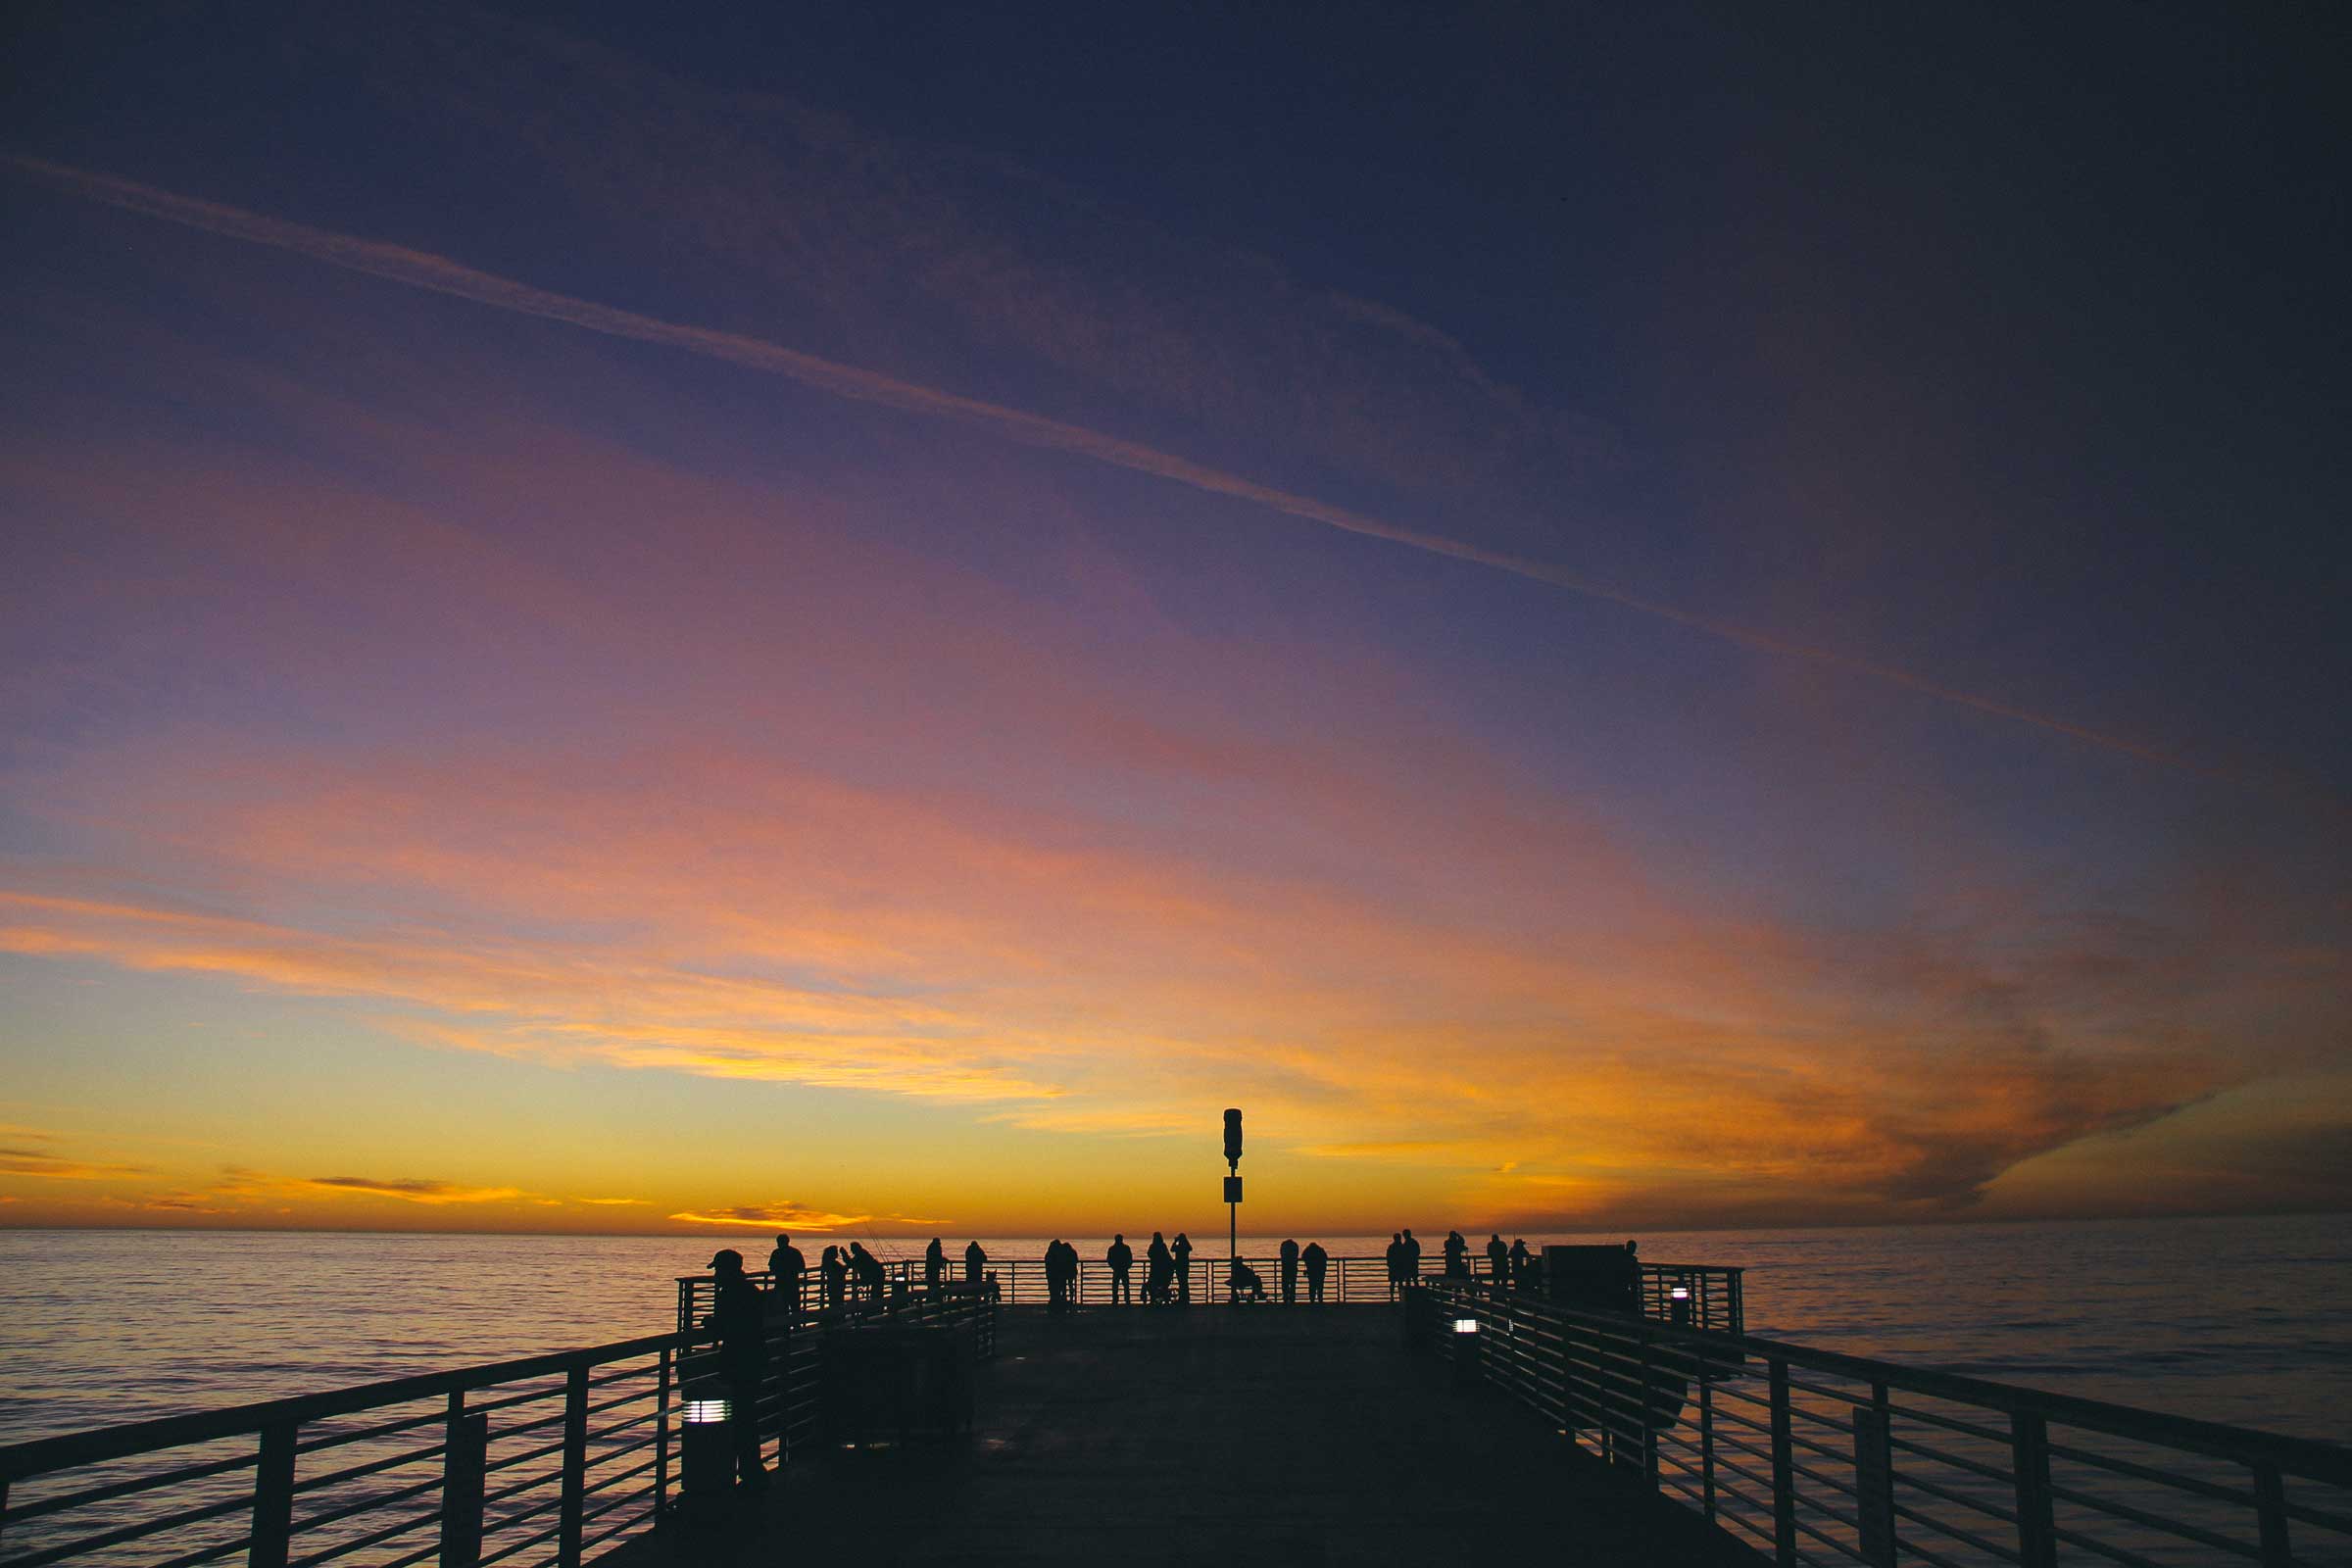 A pier at sunset